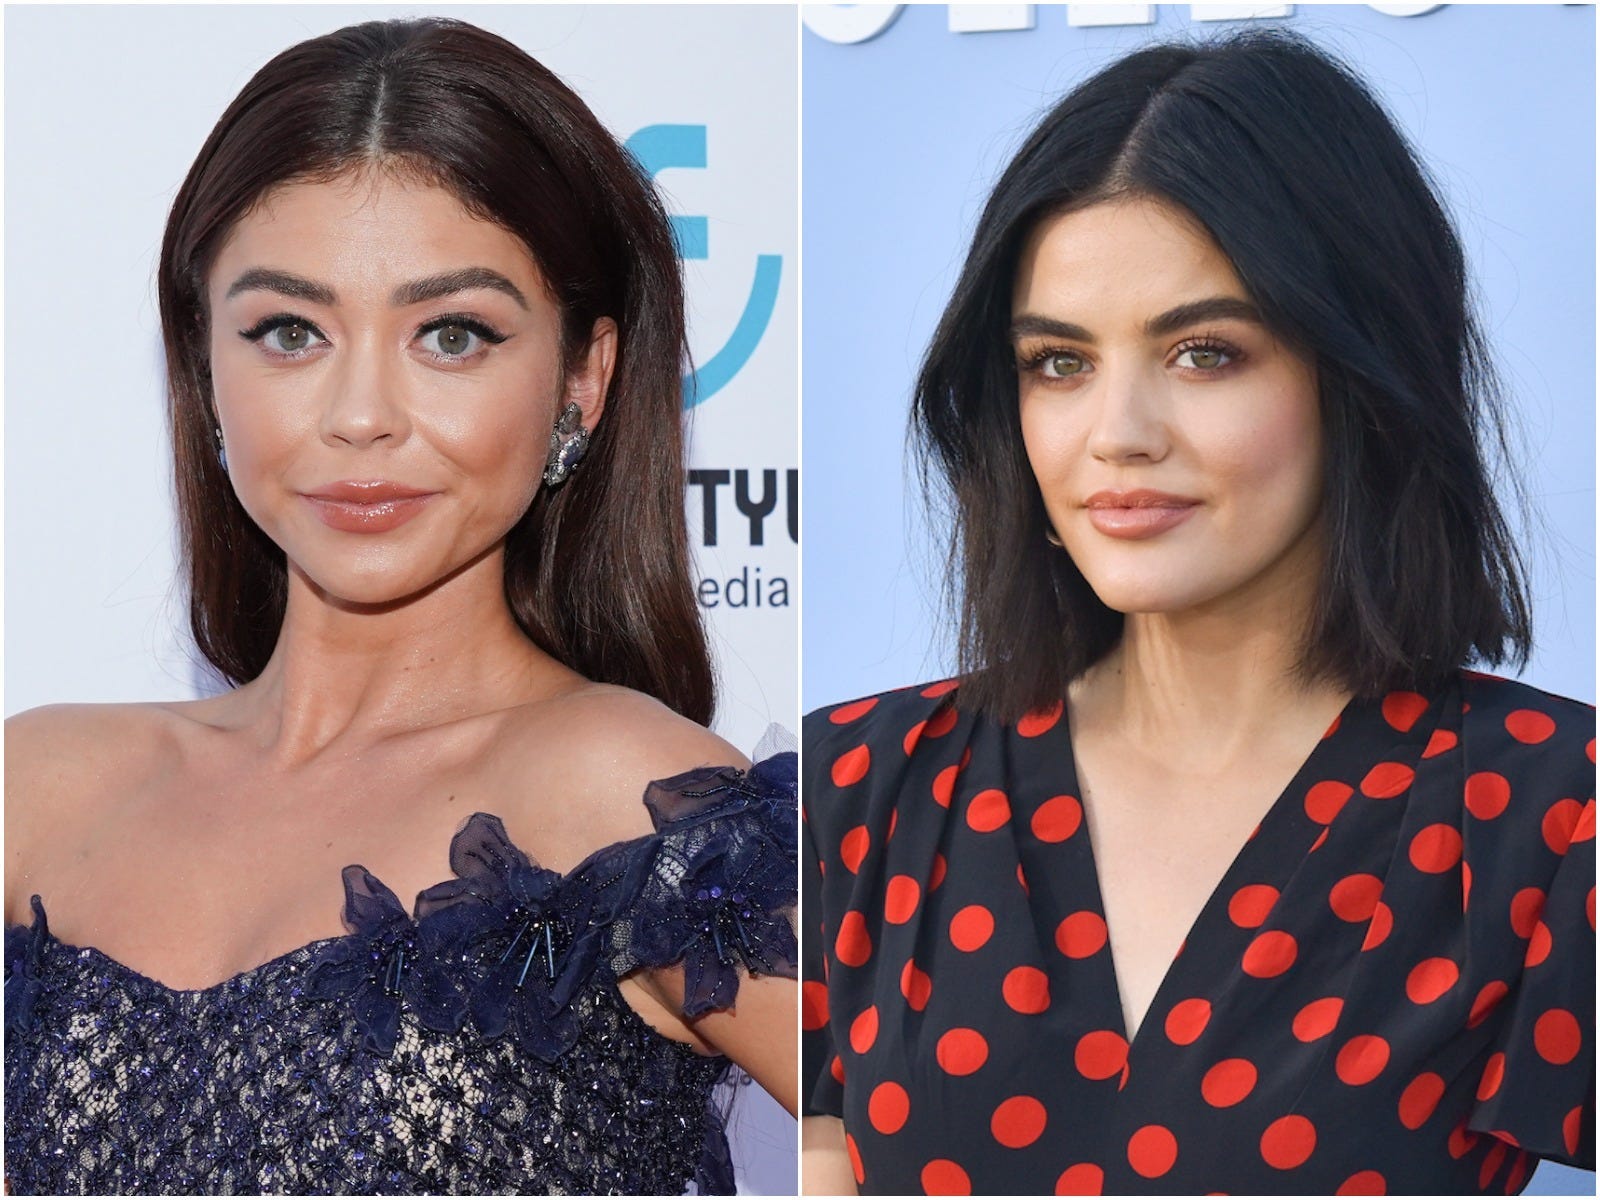 Lucy Hale and Sarah Hyland have posted twinning photos in the past.